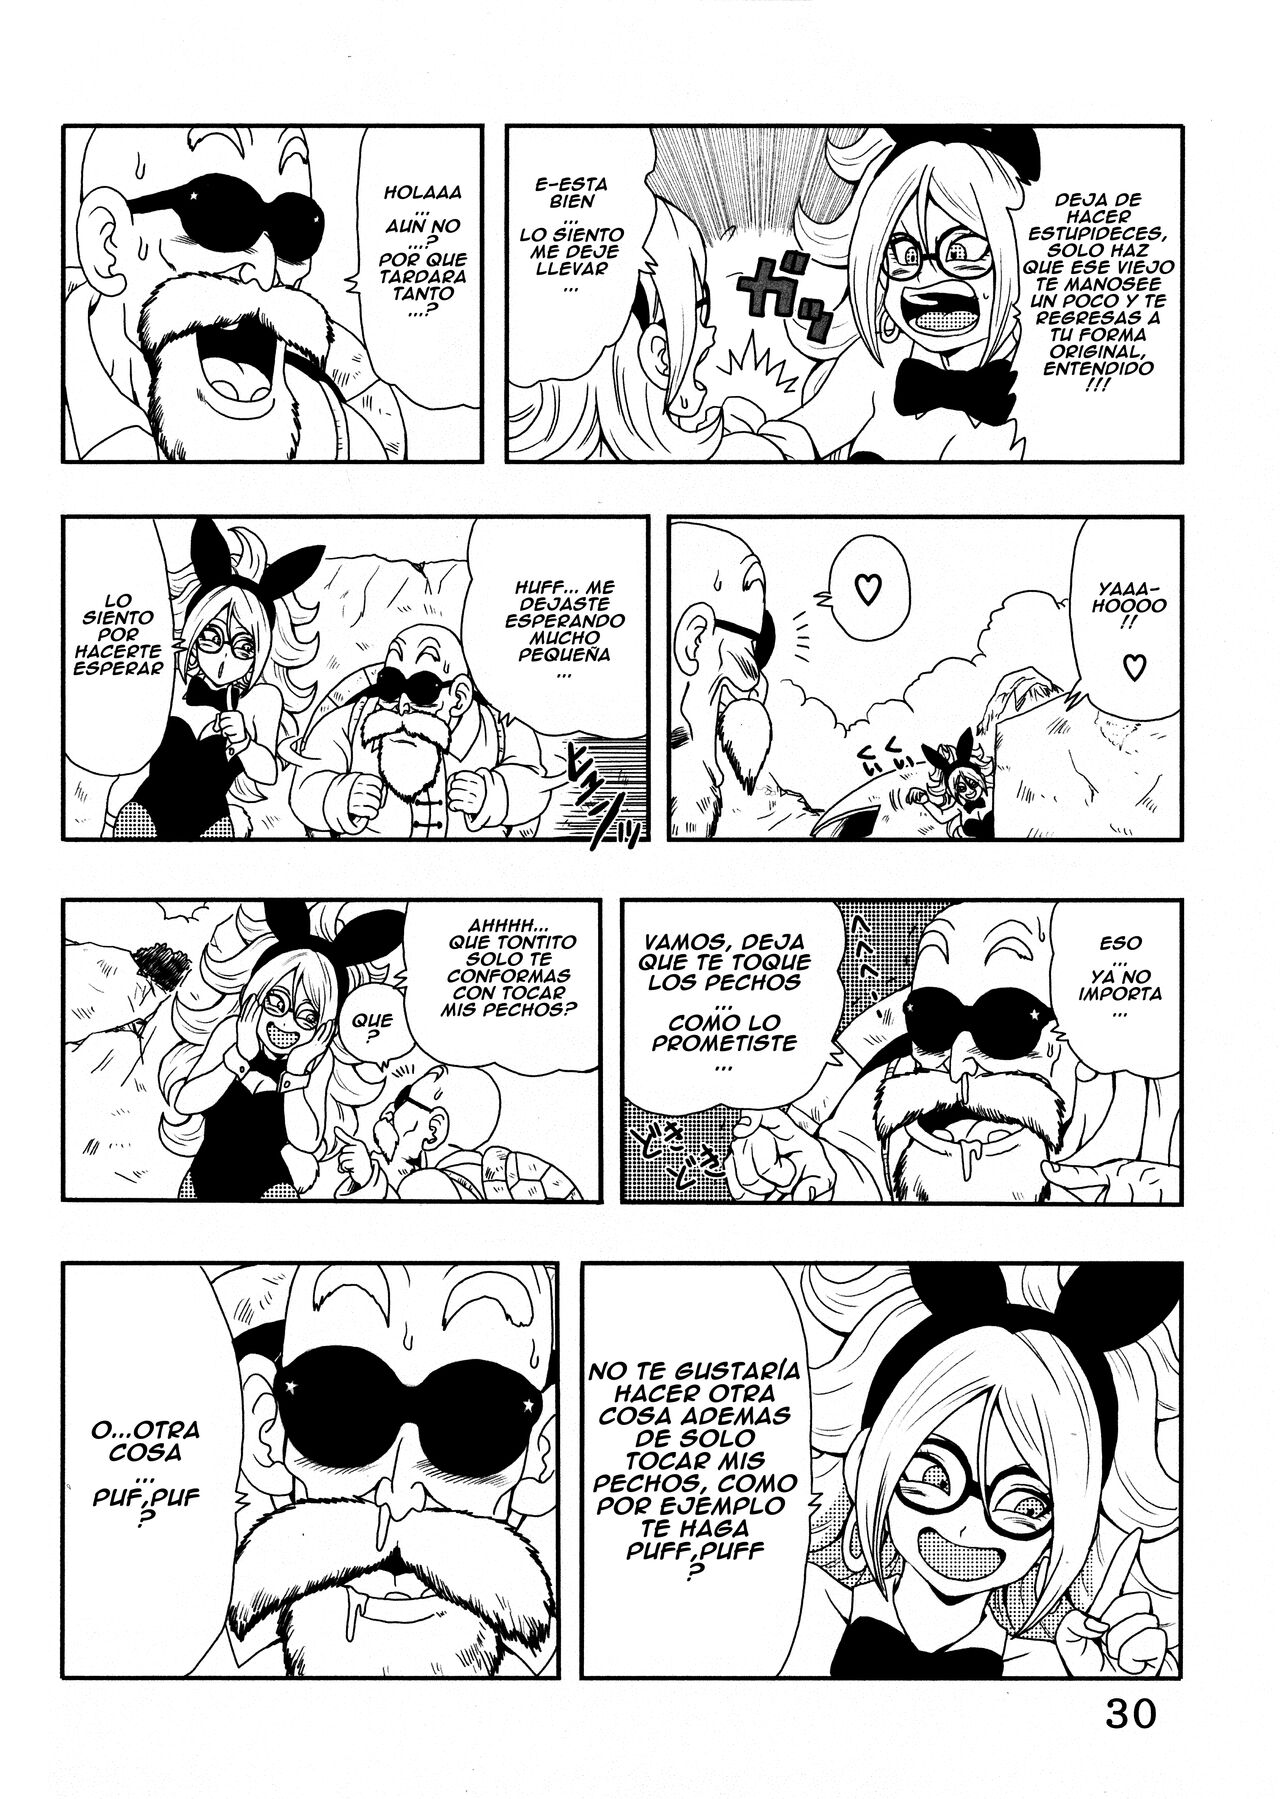 Episode of BULMA - ANDROID 21 Version